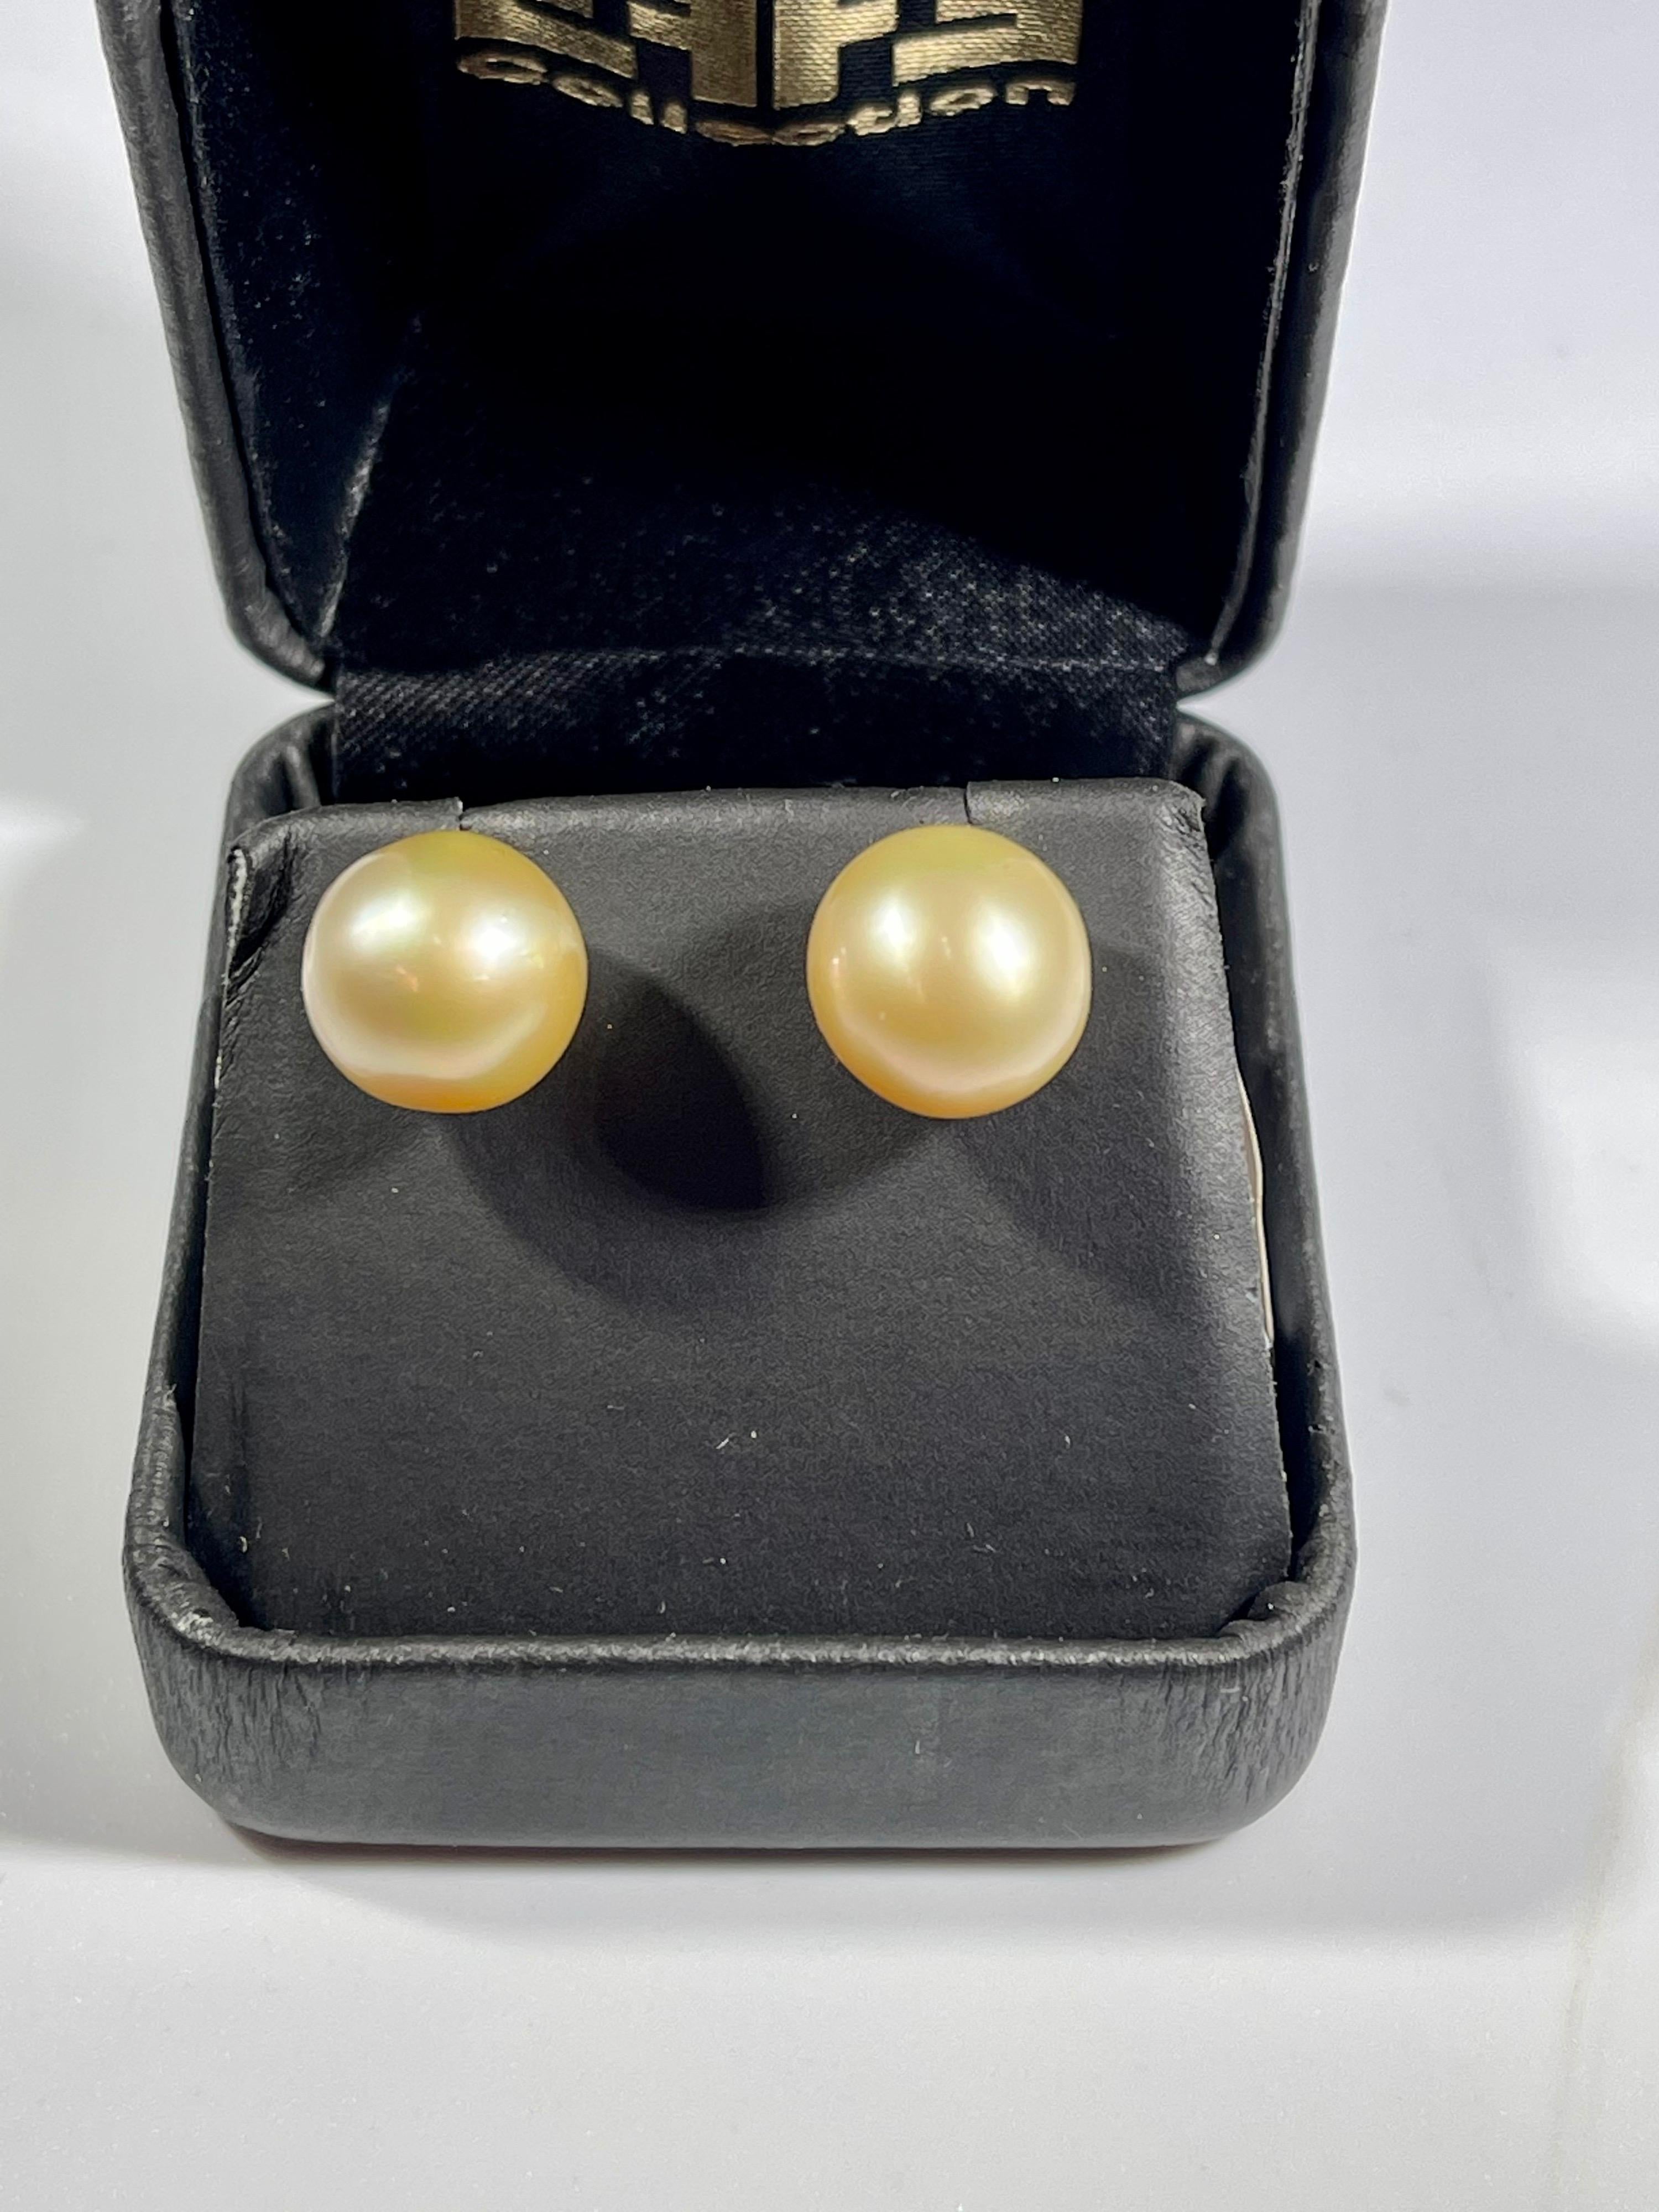 11 MM Golden South Sea Pearl Stud Earrings 18 Karat Yellow Gold 
 pearls are  clean but have some scratch or  blemishes .
Light golden in color
perfect pair made in 18 Karat Yellow gold
backs are made of solid 18 k gold and very sturdy to keep the